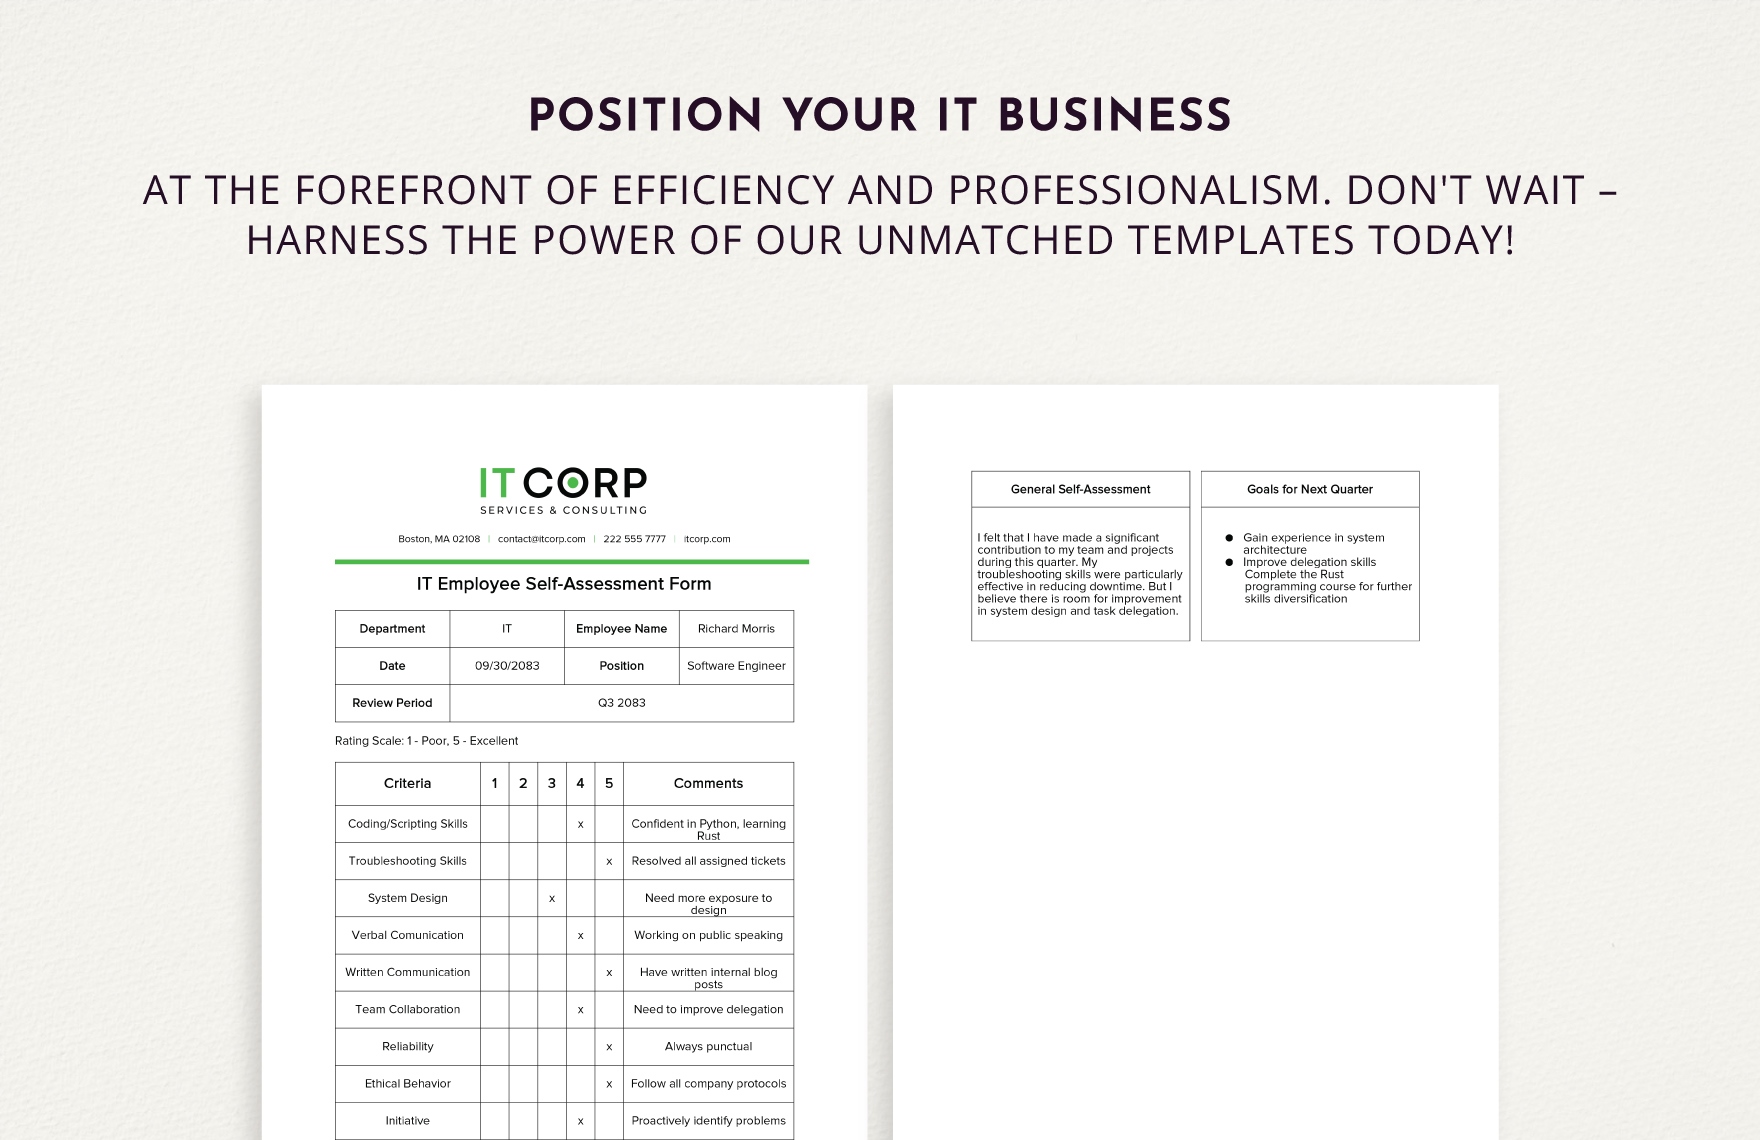 IT Employee Self-assessment Form Template